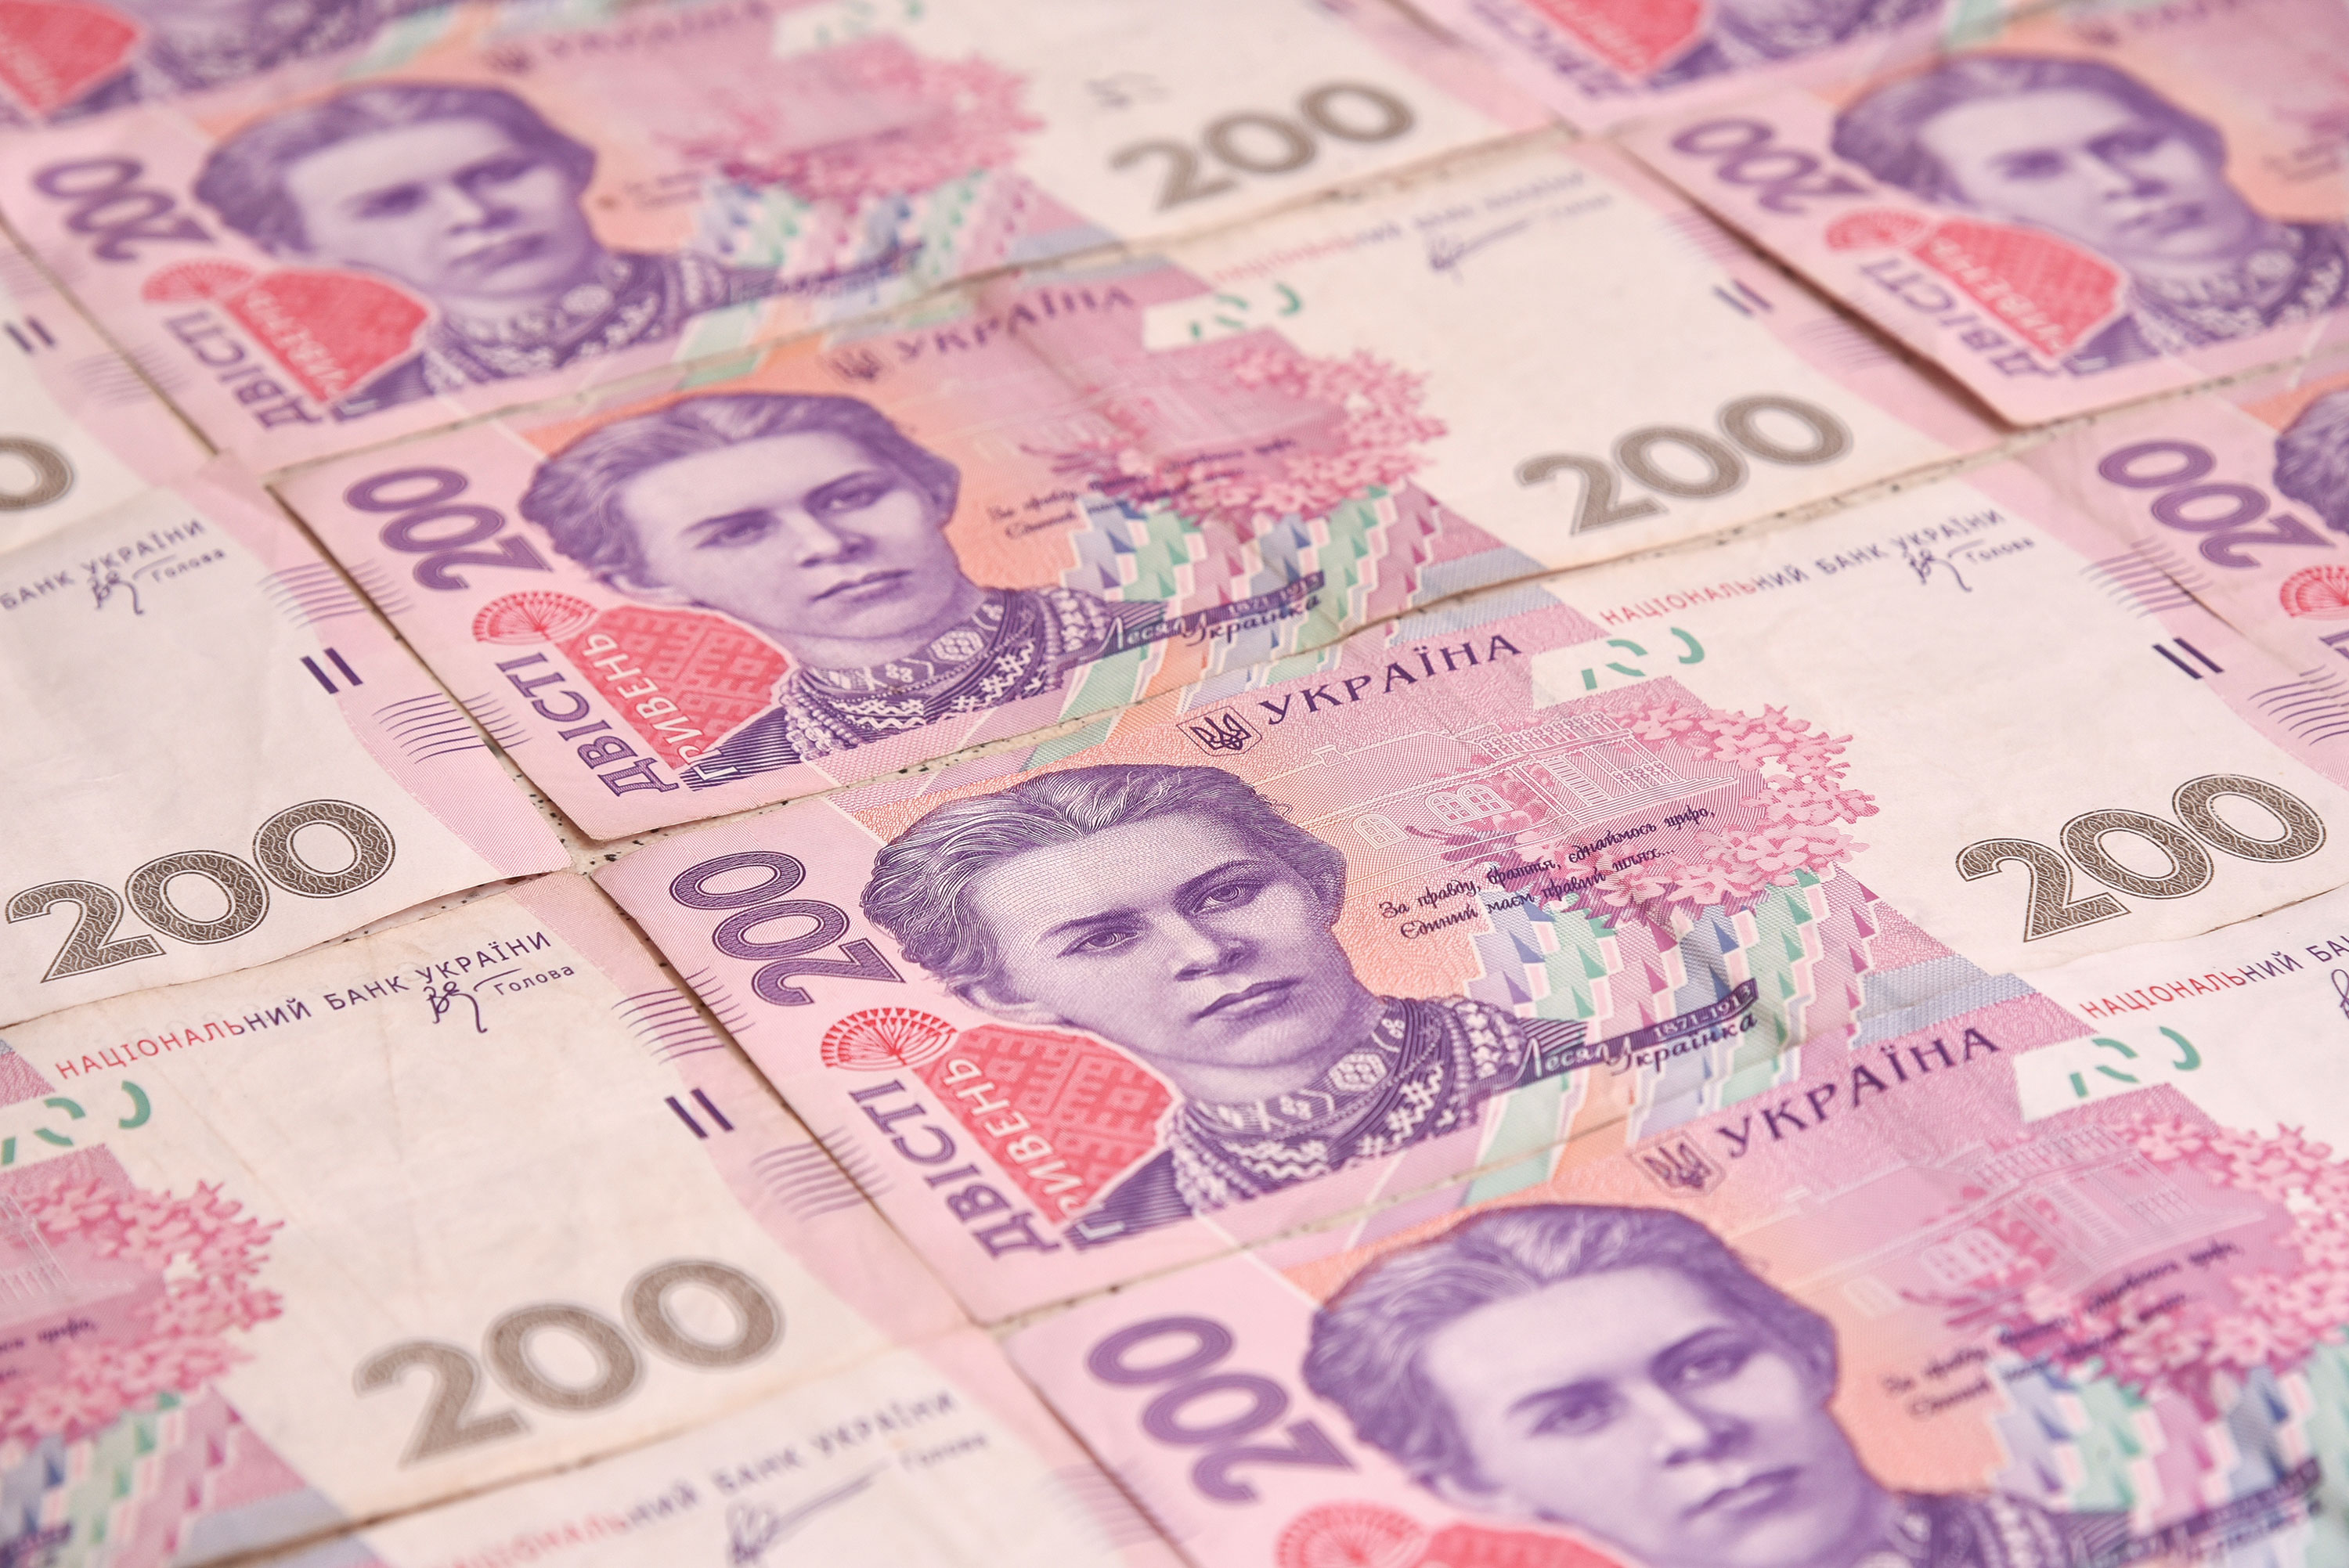 Banknotes worth 200 hryvnia each are seen in this photo illustration.